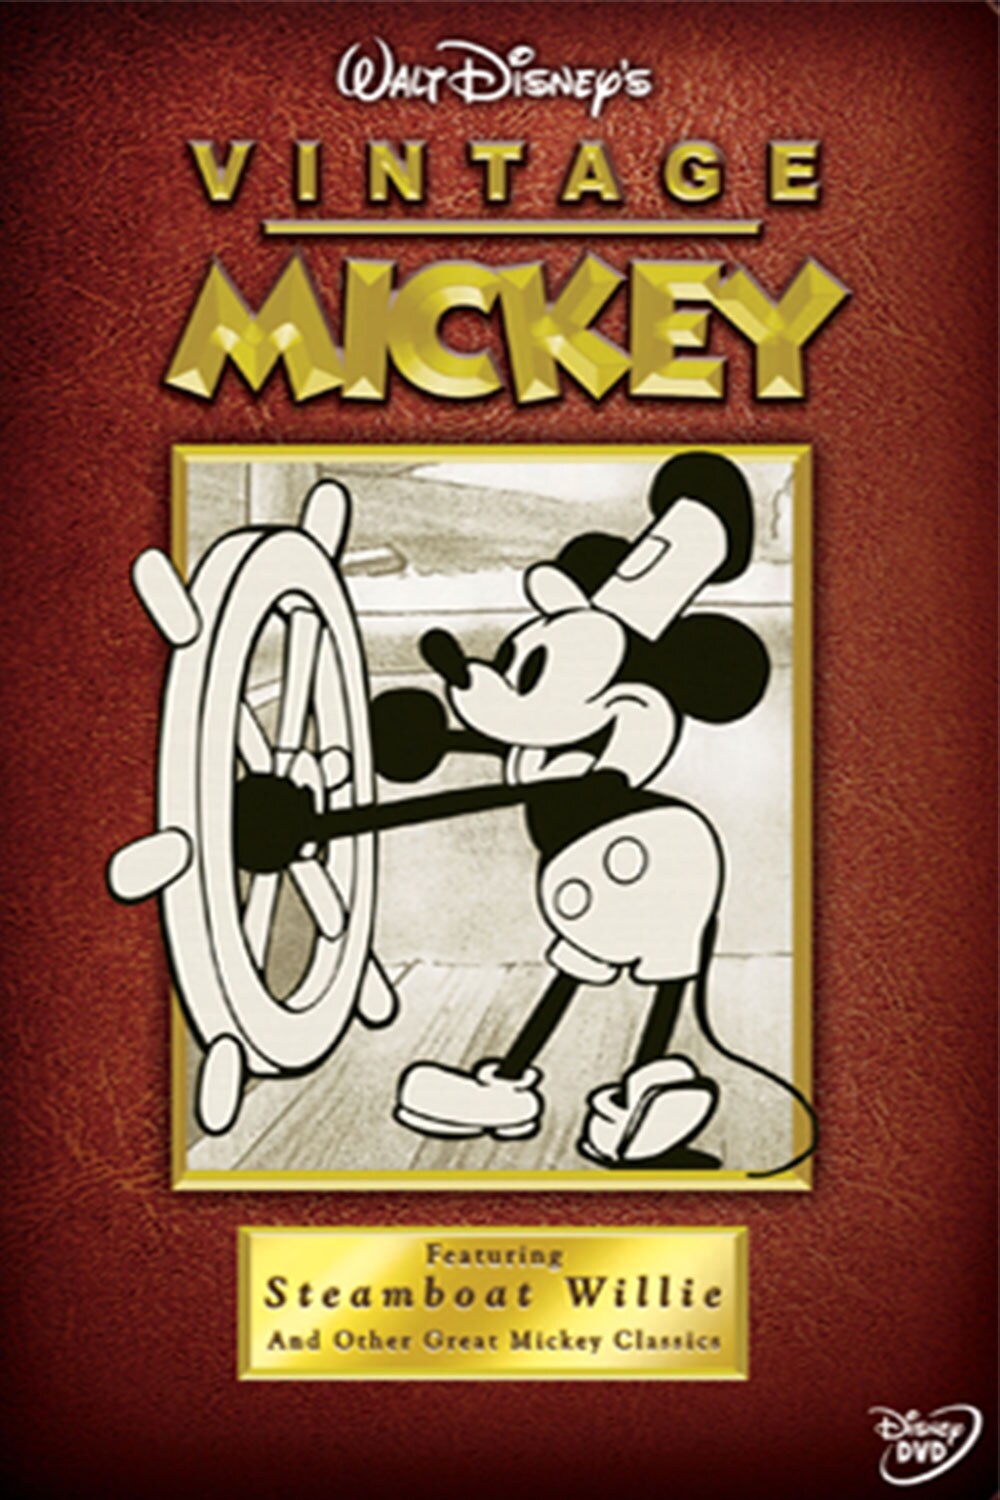 Walt Disney's Vintage Mickey movie poster, Featuring Steamboat Willie and other great Mickey Classics